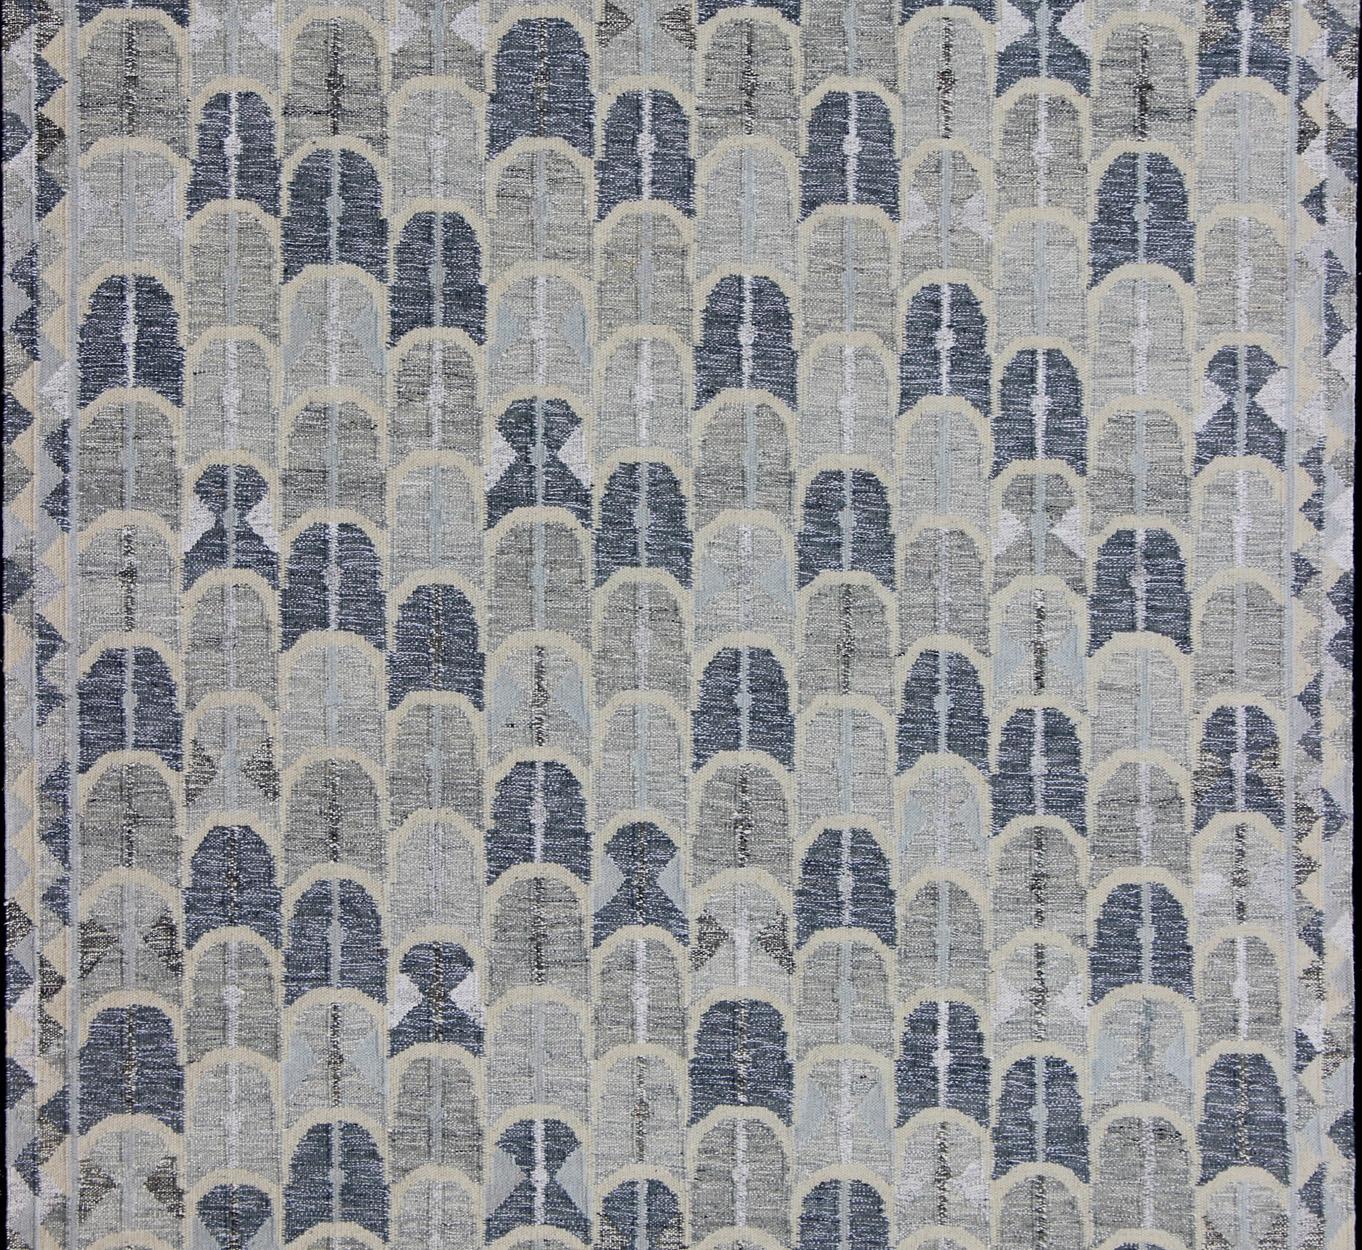 Indian Contemporary Scandinavian Design Flat-Weave Rug in Blue, Cream and Grays